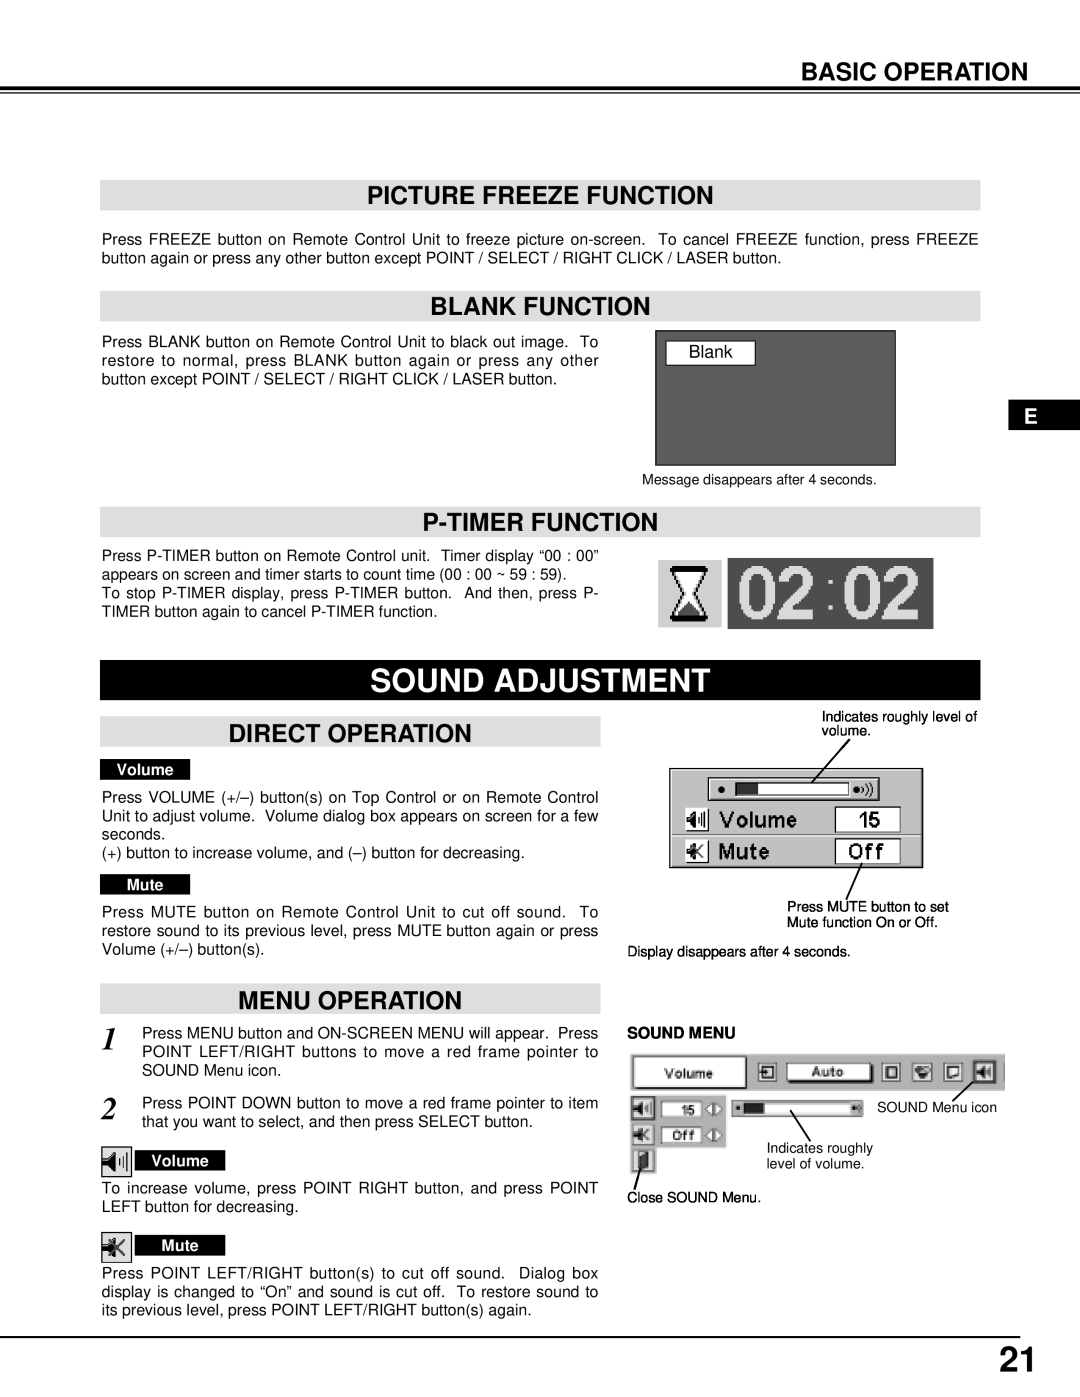 InFocus DP9295 Sound Adjustment, Basic Operation Picture Freeze Function, Blank Function, P-Timer Function, Menu Operation 